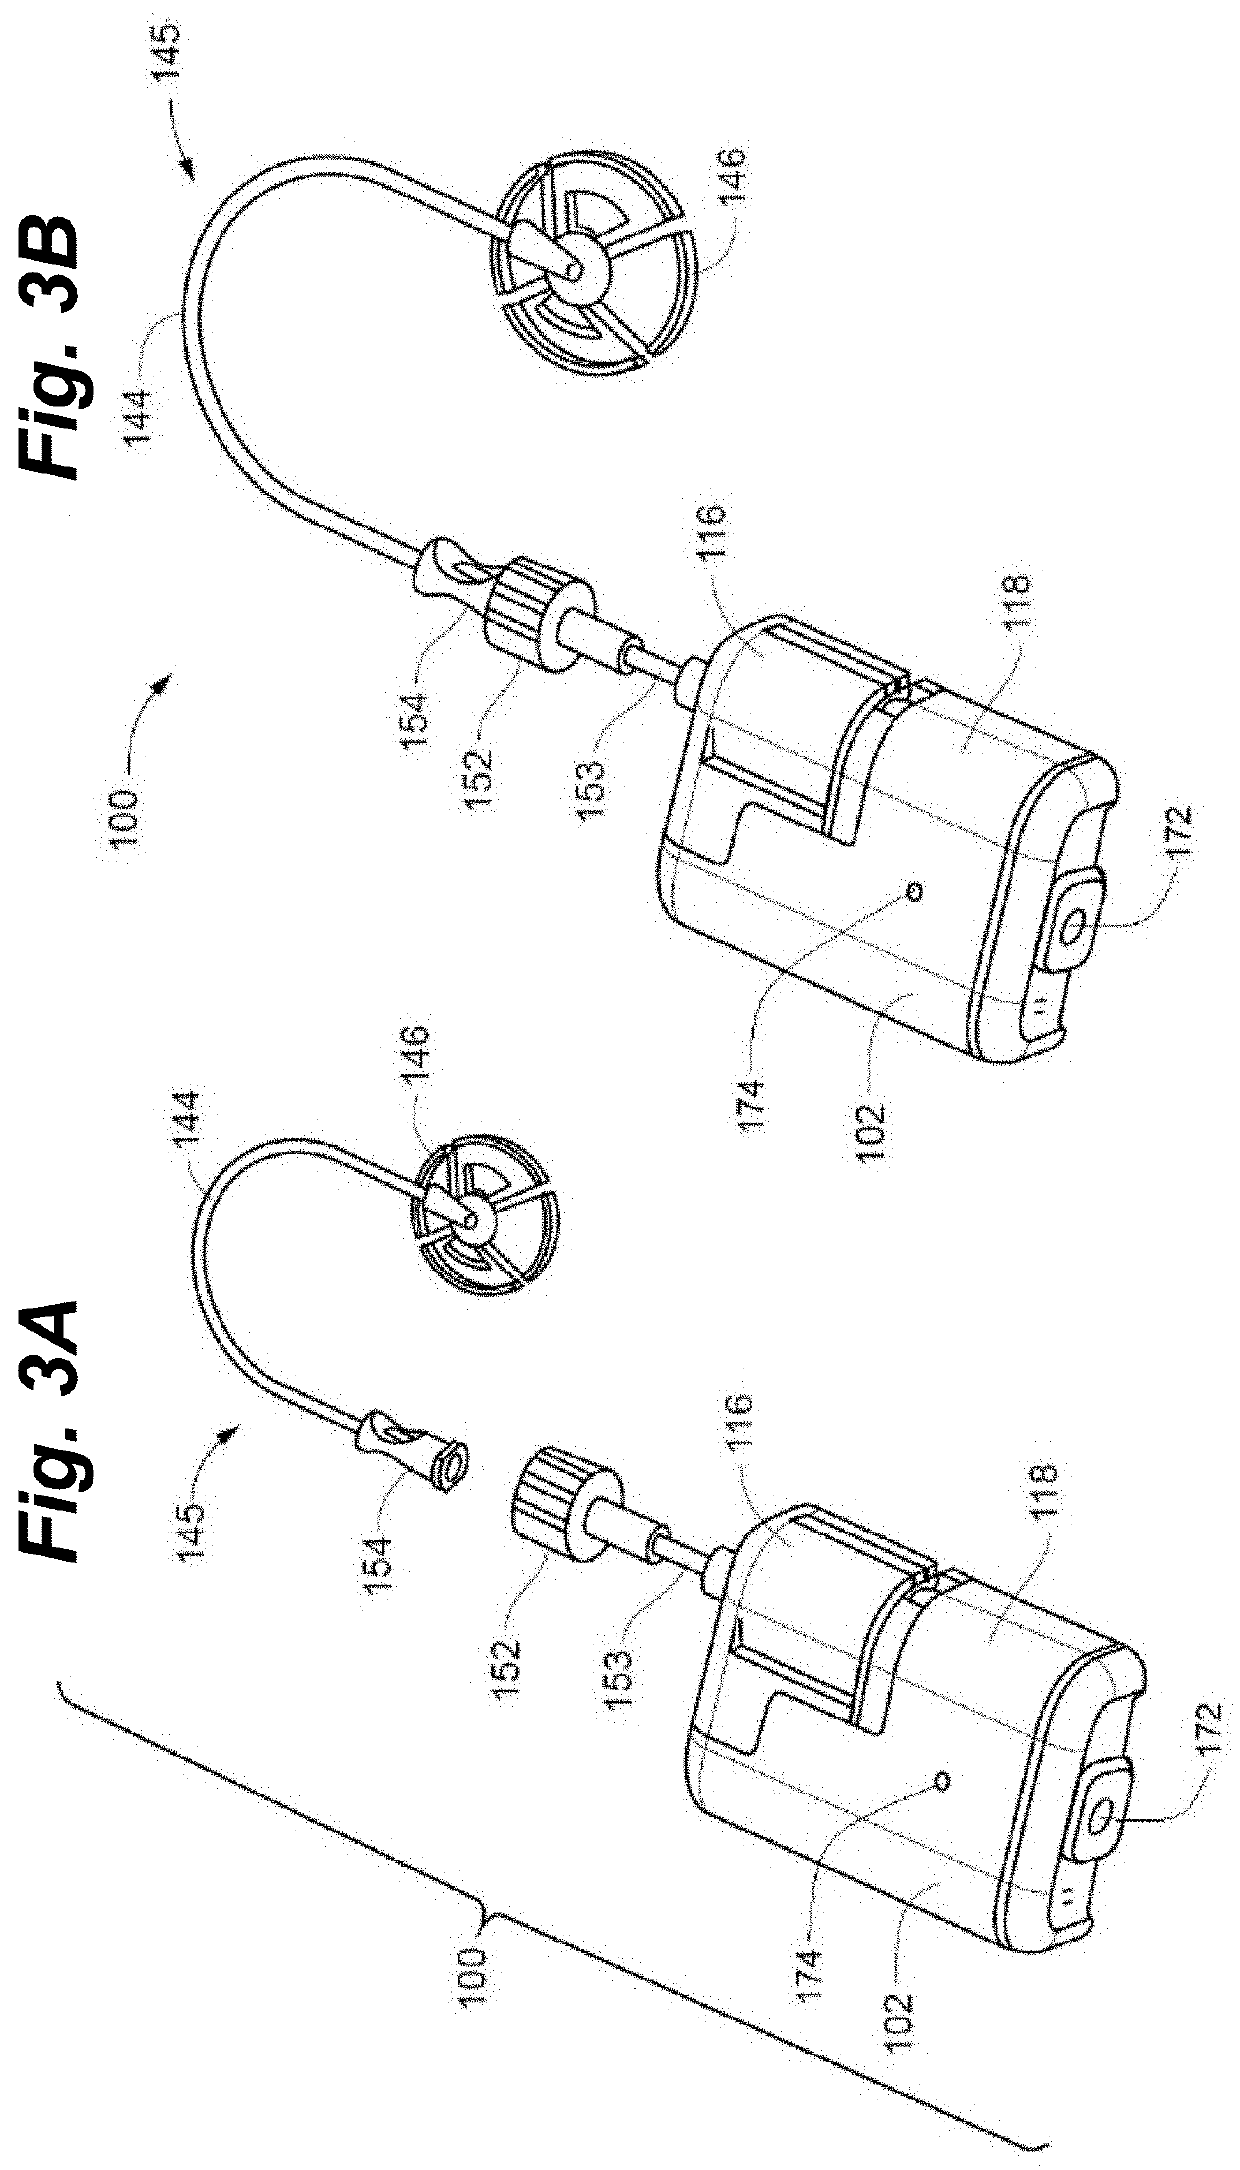 Systems and methods for automated insulin delivery response to meal announcements